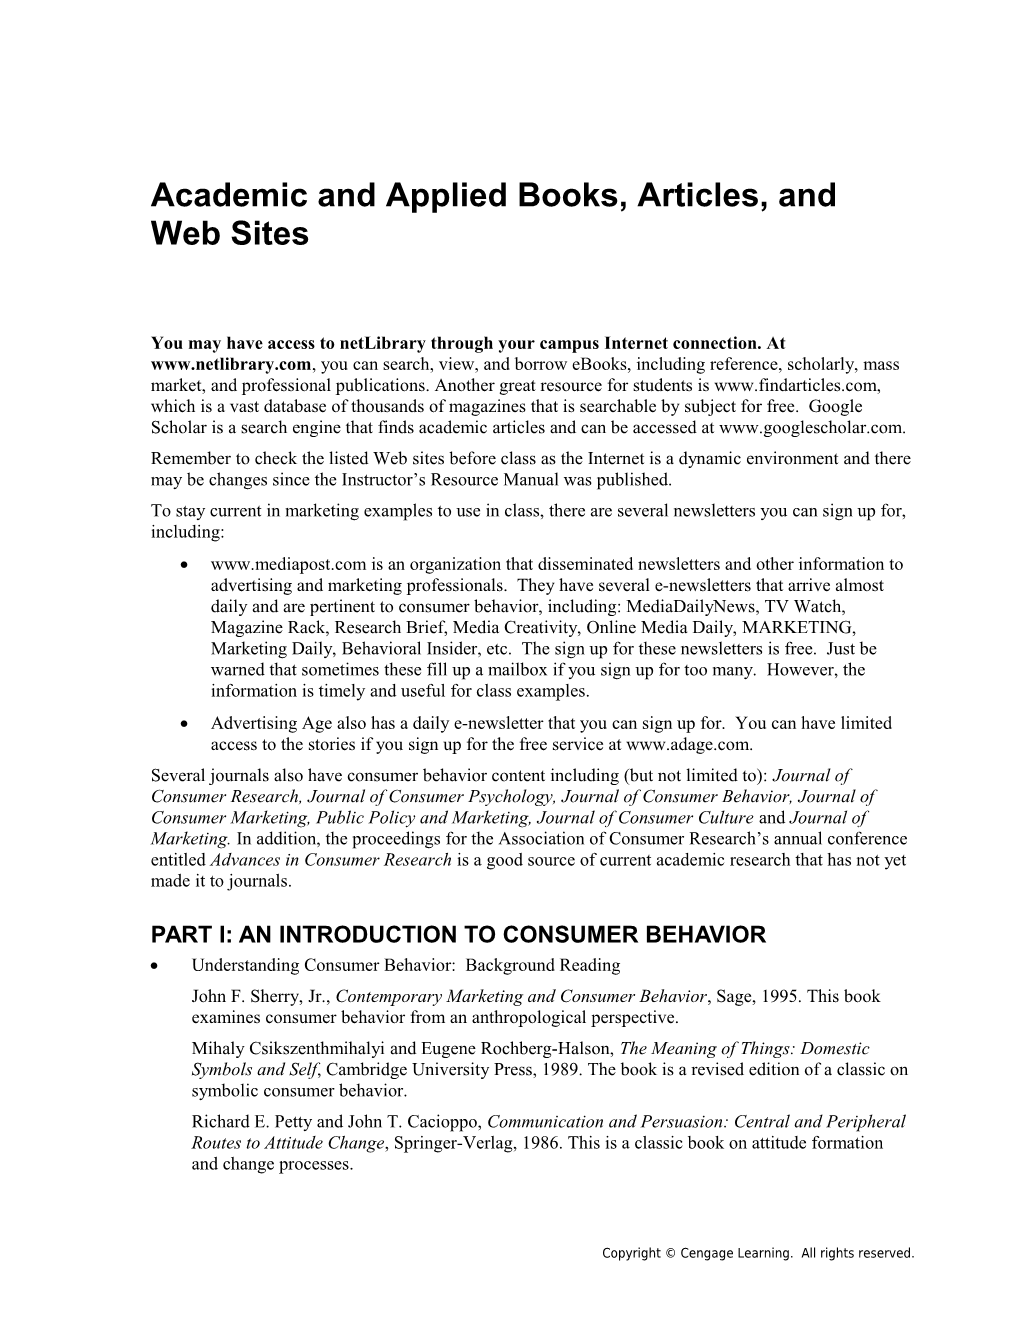 Academic and Applied Books, Articles, and Web Sites1